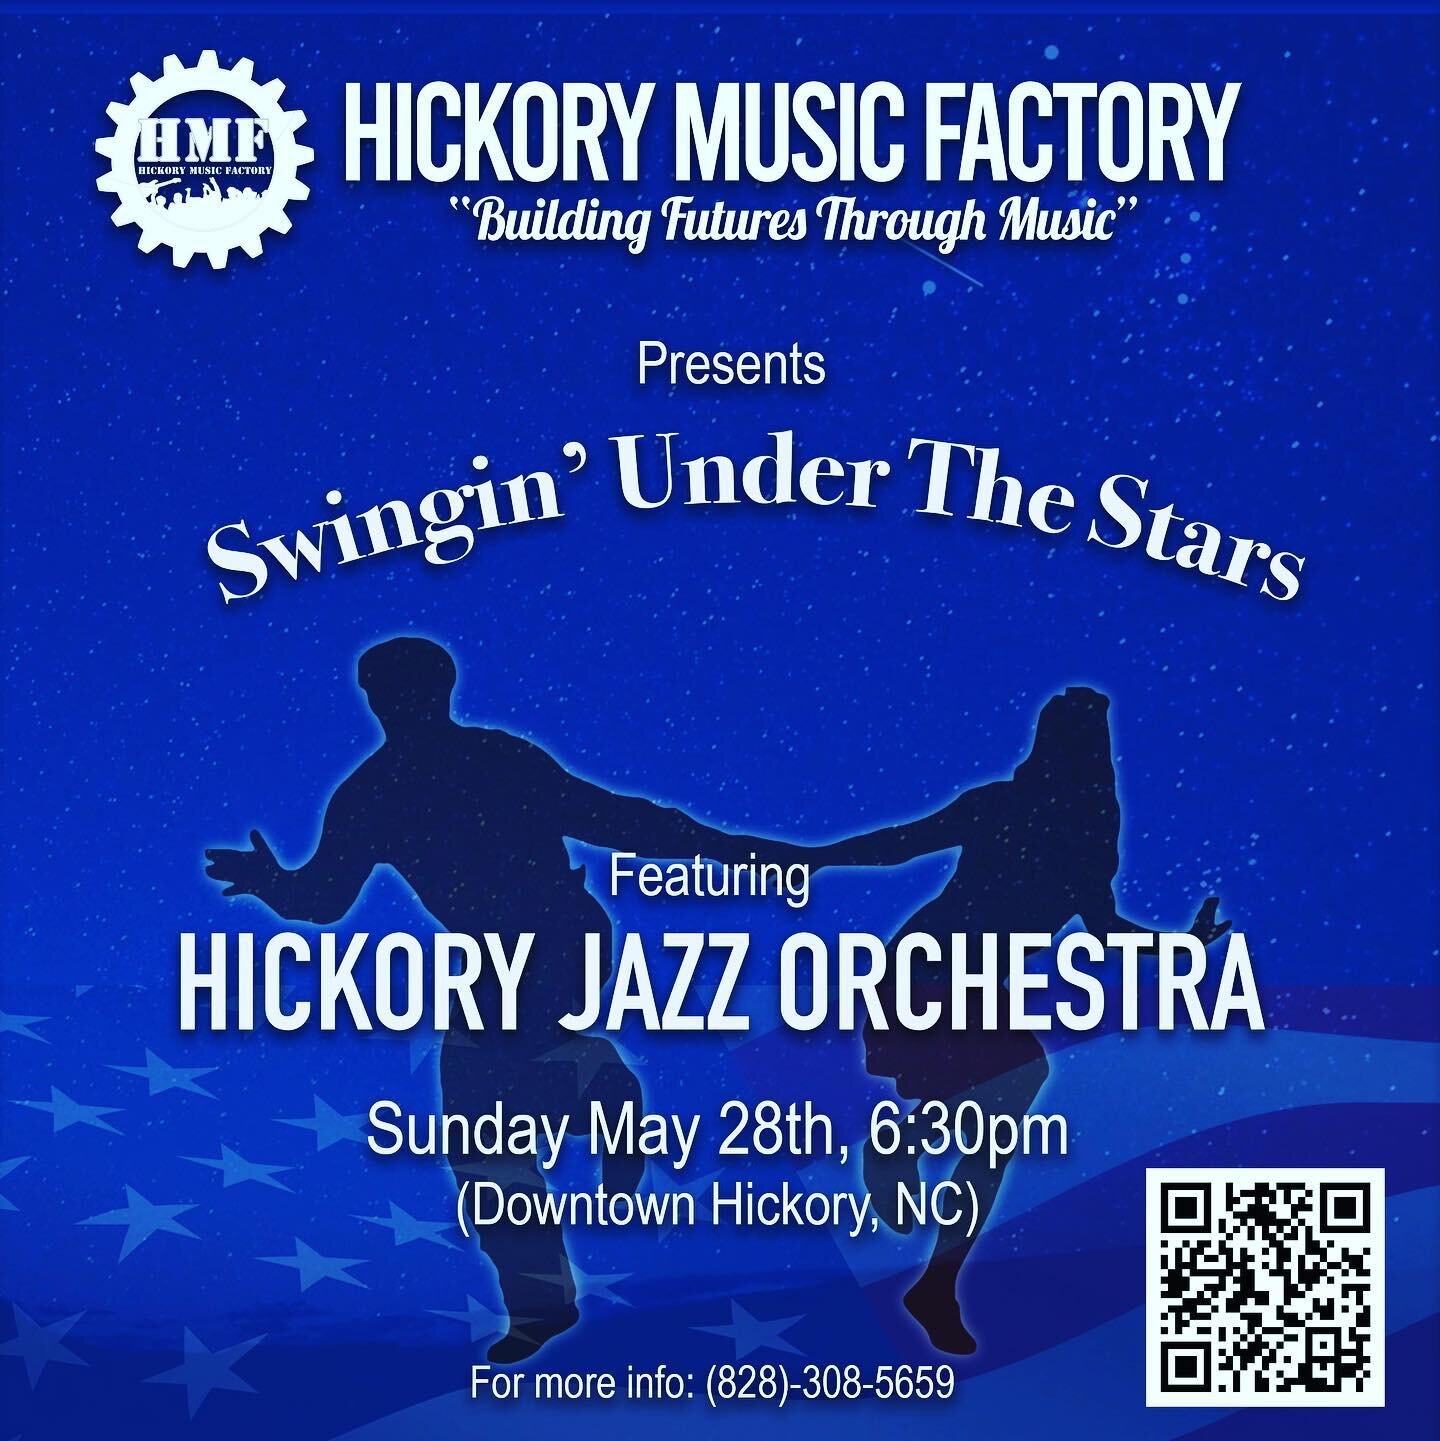 It&rsquo;s that time of year again. We can wait to see everyone at our annual Swingin Under The Stars. For more information visit https://www.hickorymusicfactory.com/ #swingdance #bigbandjazz #familyfun